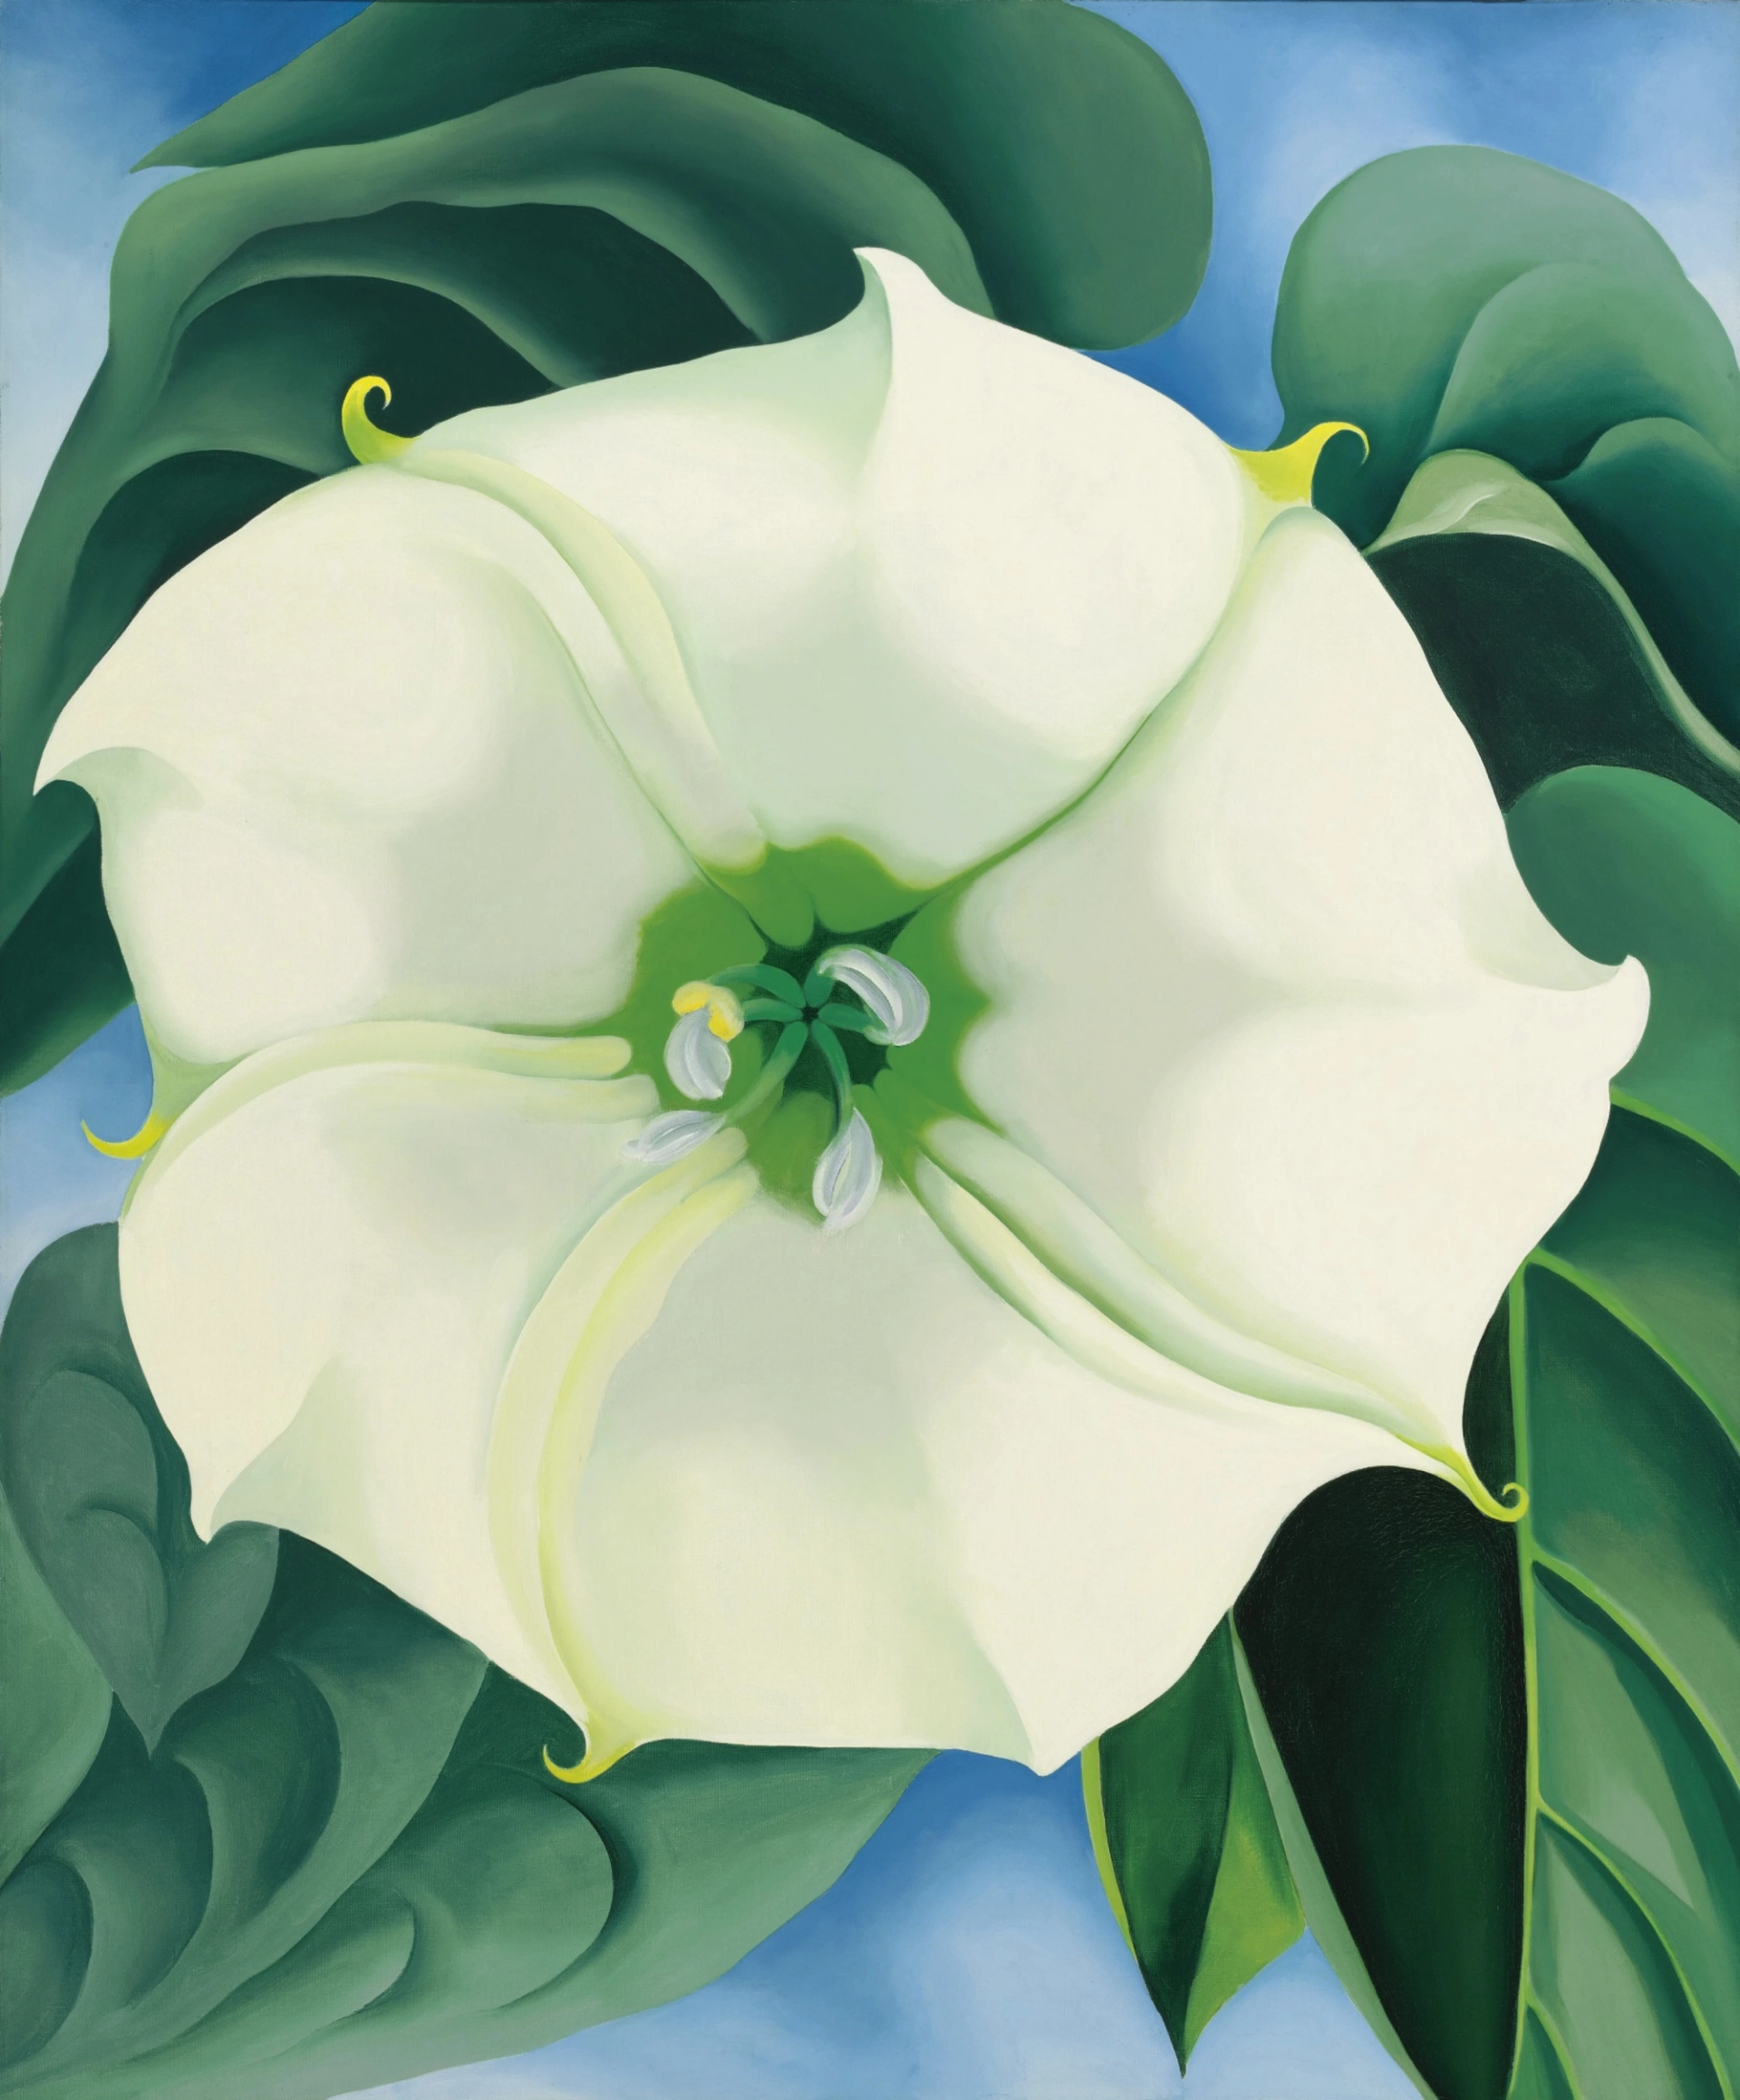 This painting by Georgia O'Keeffe shows the close-up of a white flower, surroundedm by green foliage against a 